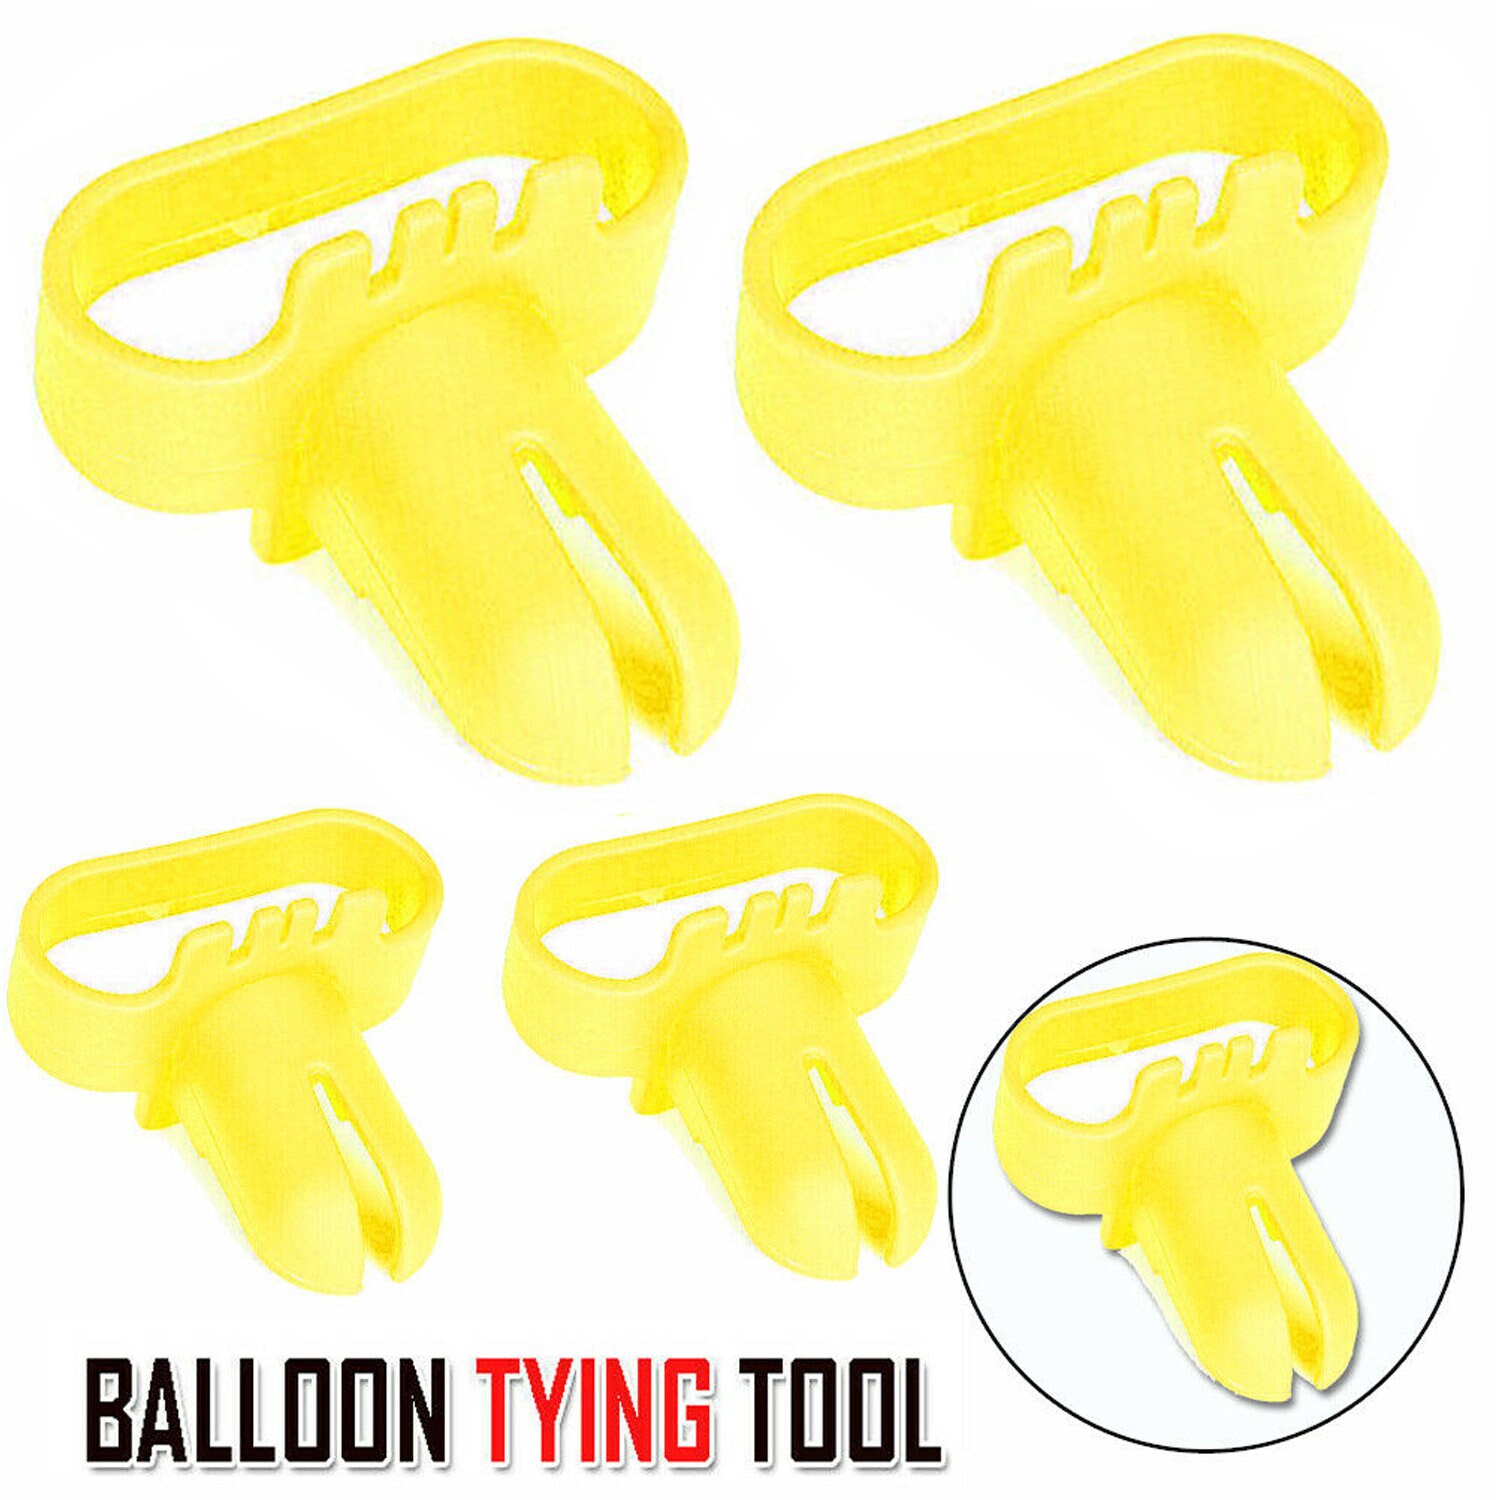 Wedding Supplies Quick Balloons Knotter Knot Tying Balloon Tie Party Tools  